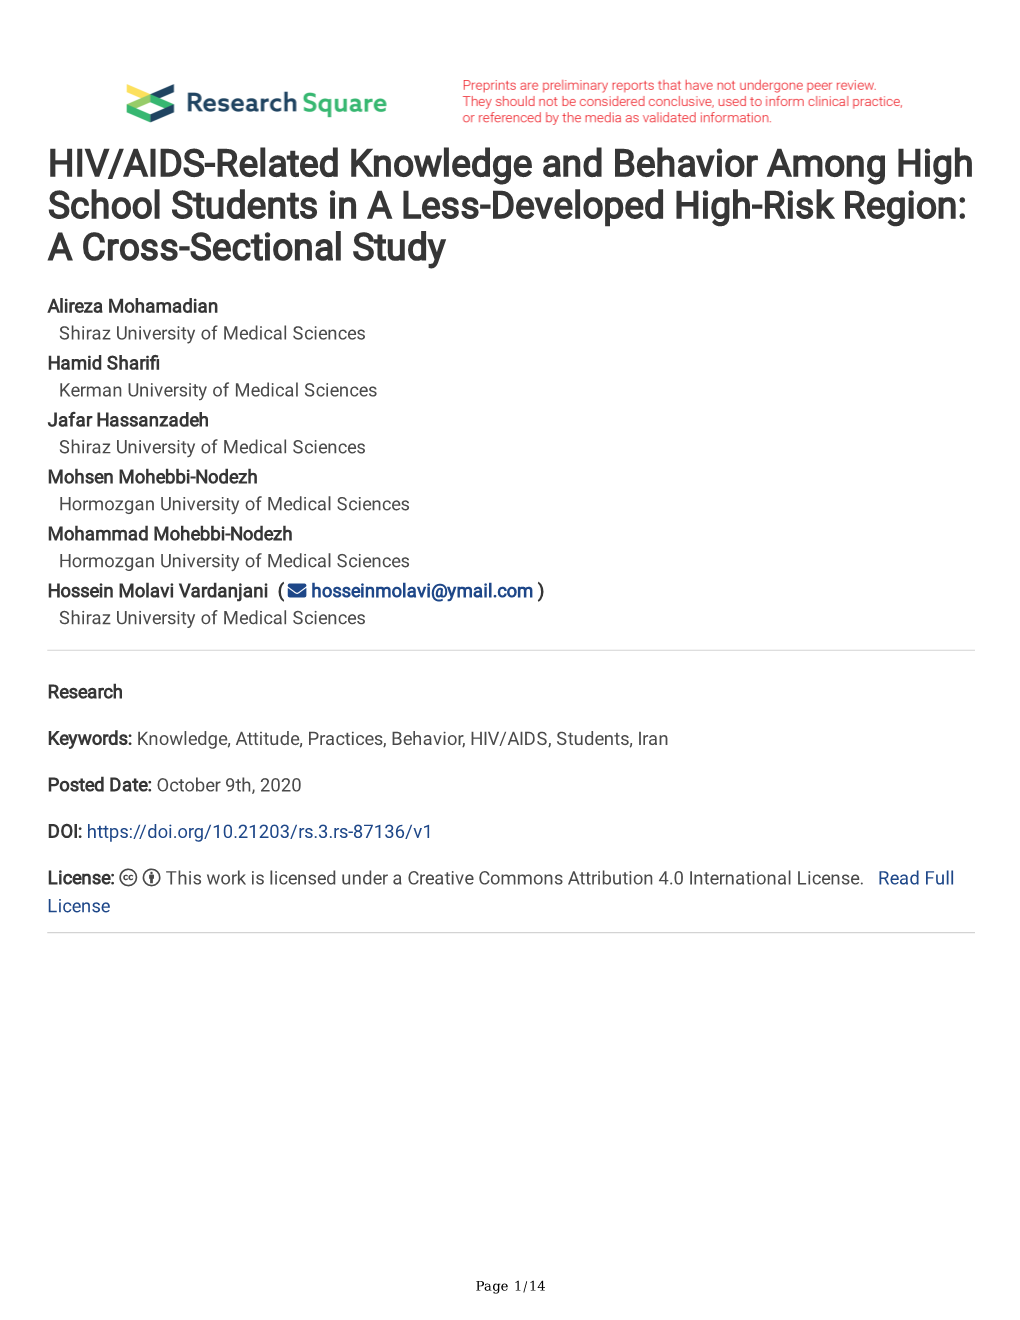 HIV/AIDS-Related Knowledge and Behavior Among High School Students in a Less-Developed High-Risk Region: a Cross-Sectional Study